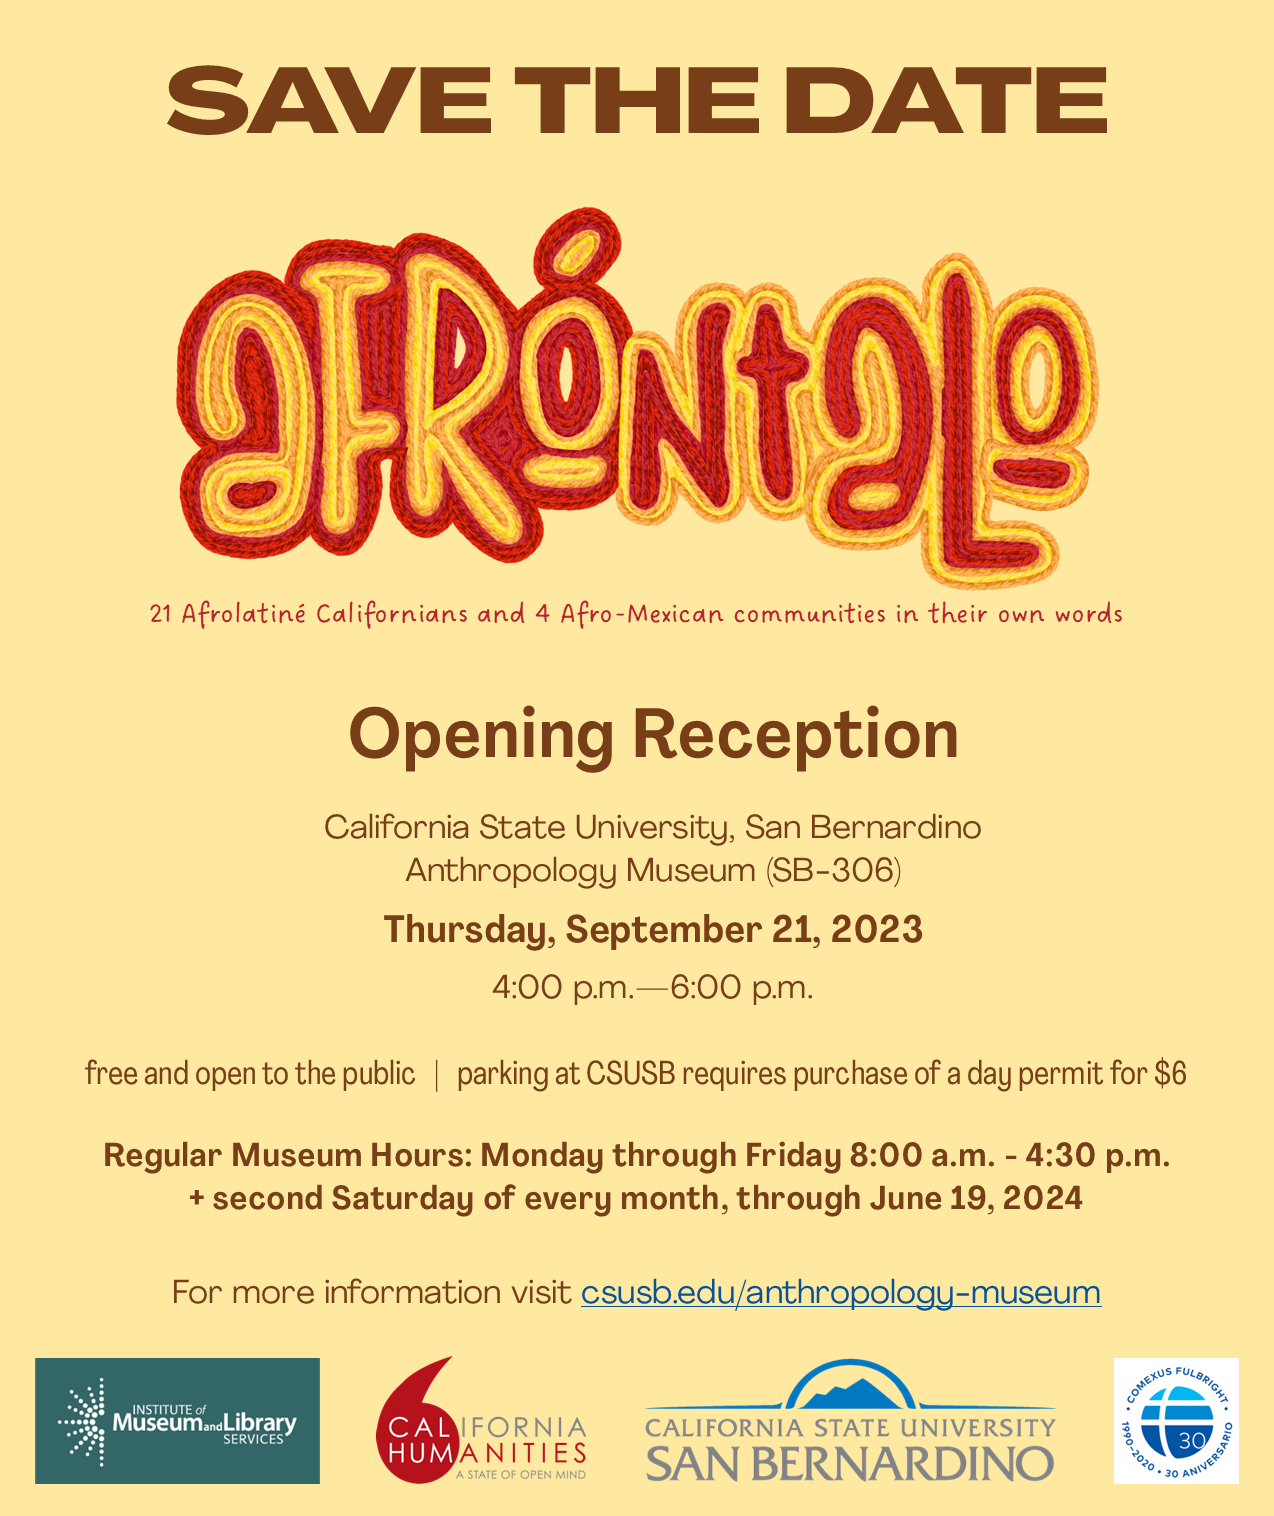 Afrontalo Opening Reception event and information flyer